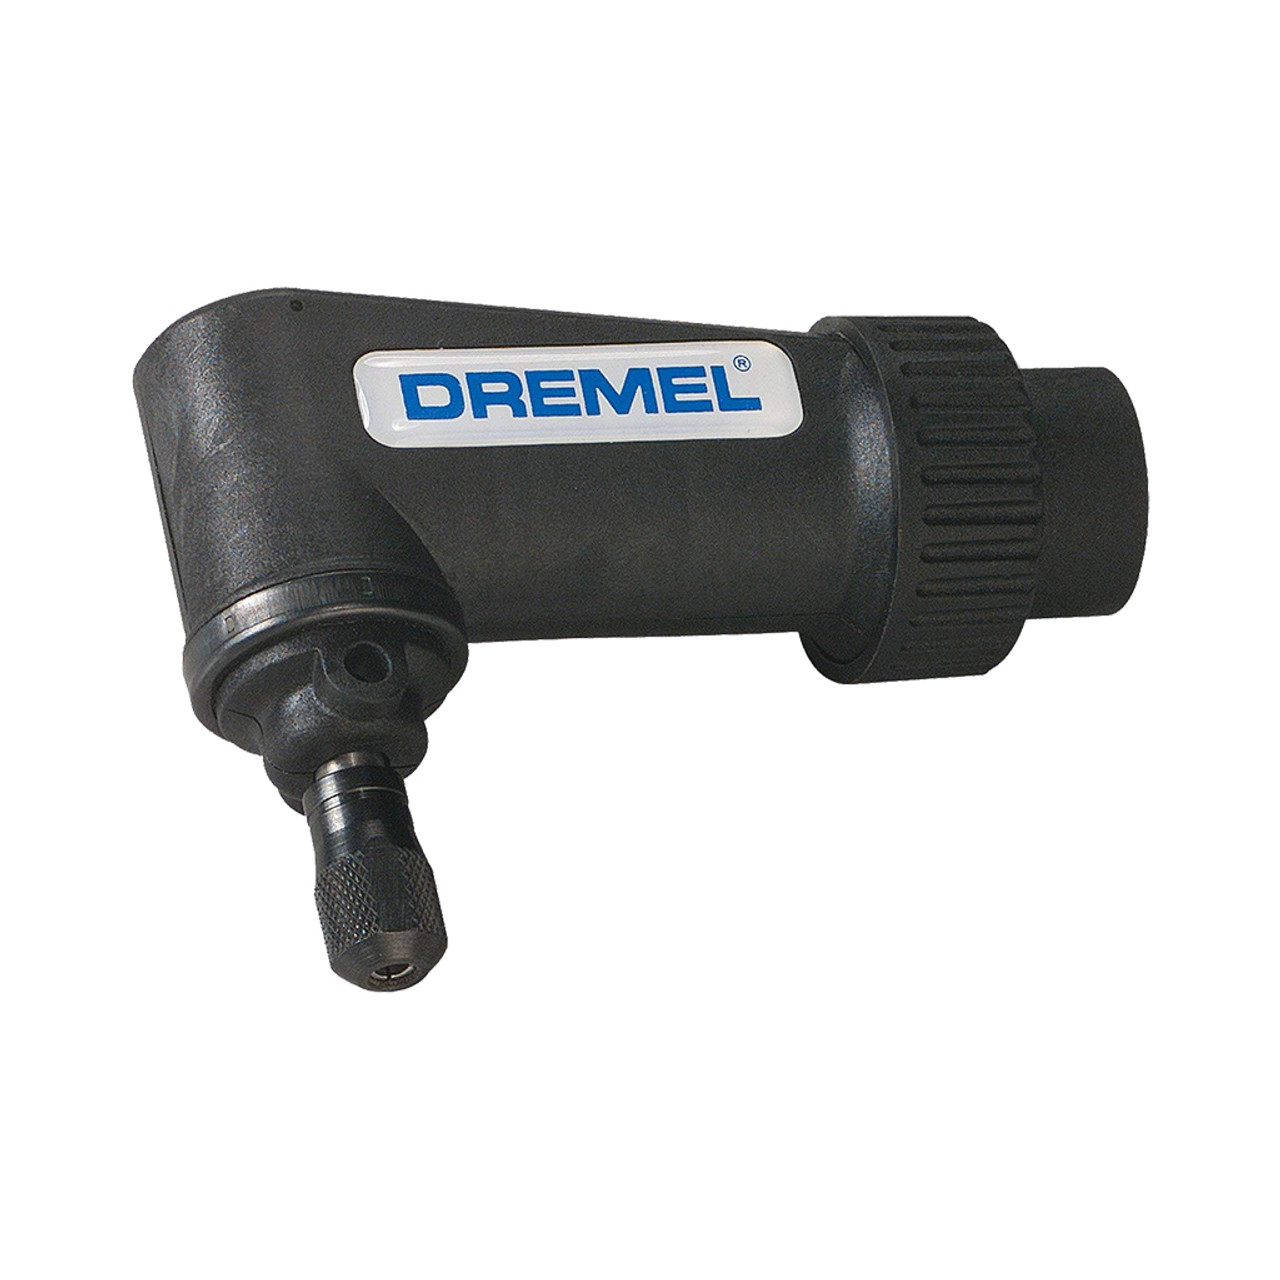 Dremel Rotary Tool Flex-shaft Attachment - Midwest Technology Products